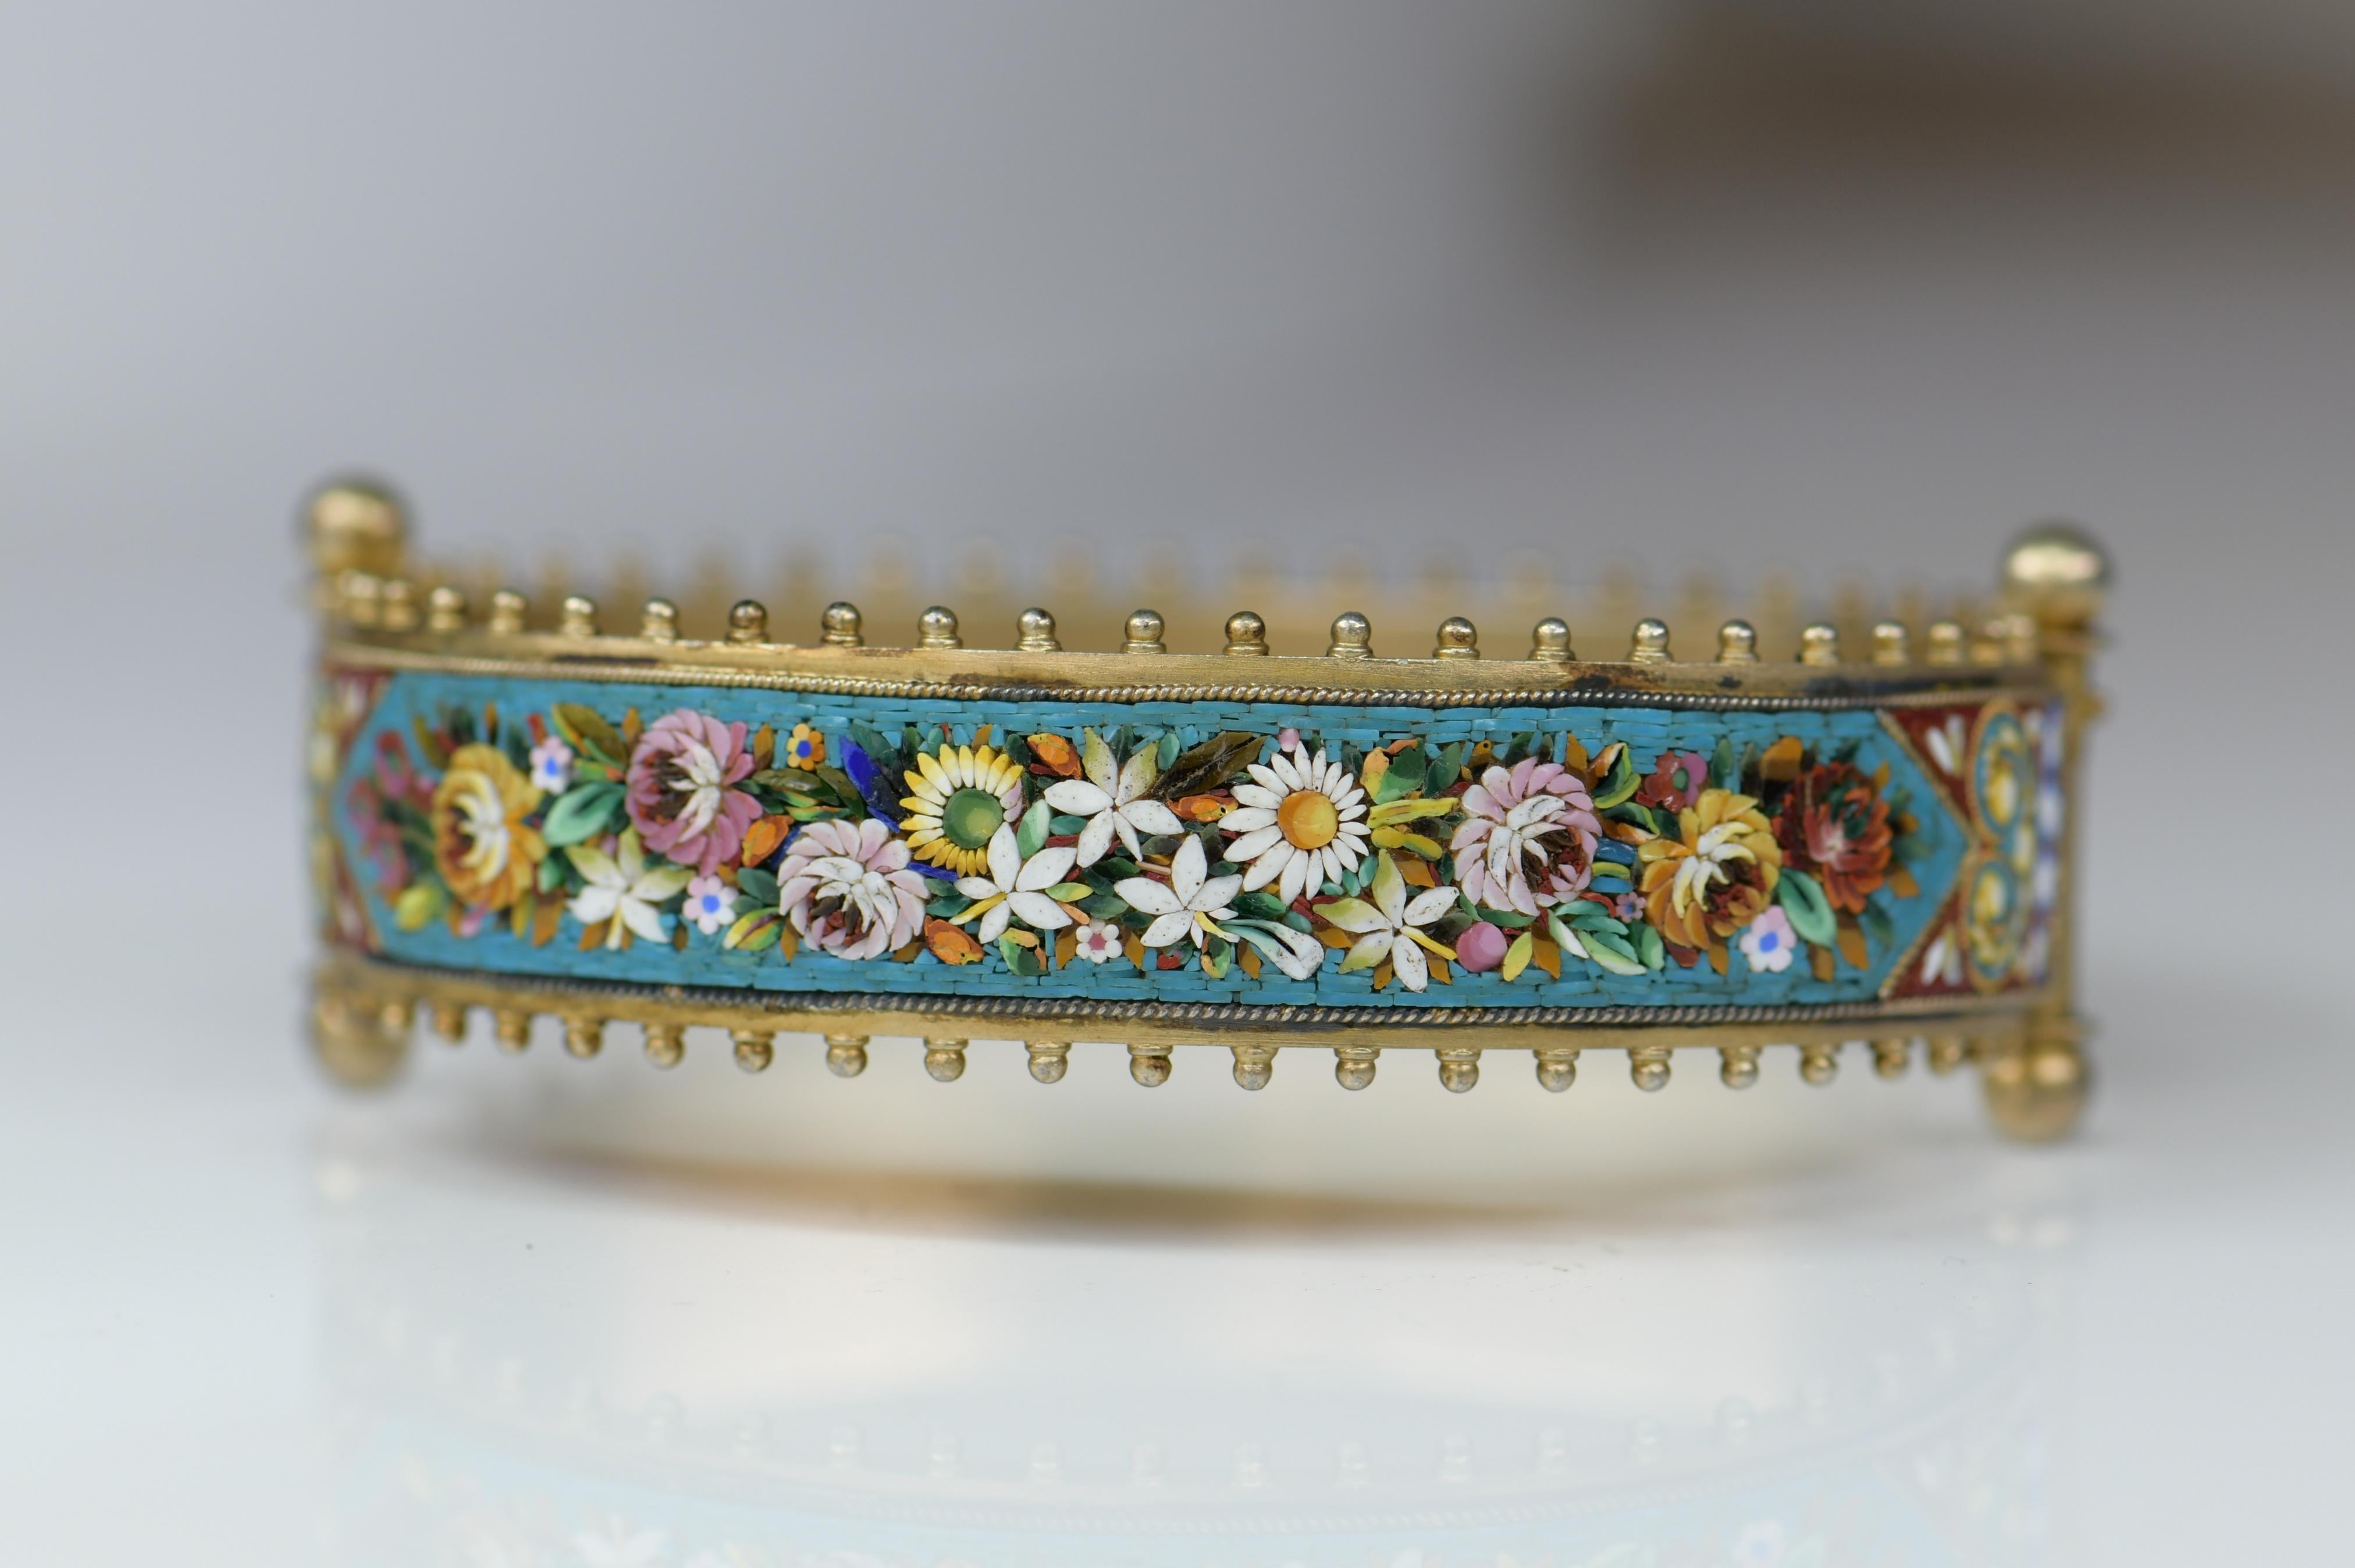 A fantastic micro mosaic bracelet from the Victorian (ca1880) era. Made of gilded silver, the bangle style bracelet has a fairly wide surface with a marvelous micro-mosaic design on both front and back. 

Tiny tiles with vivid colors of glass have